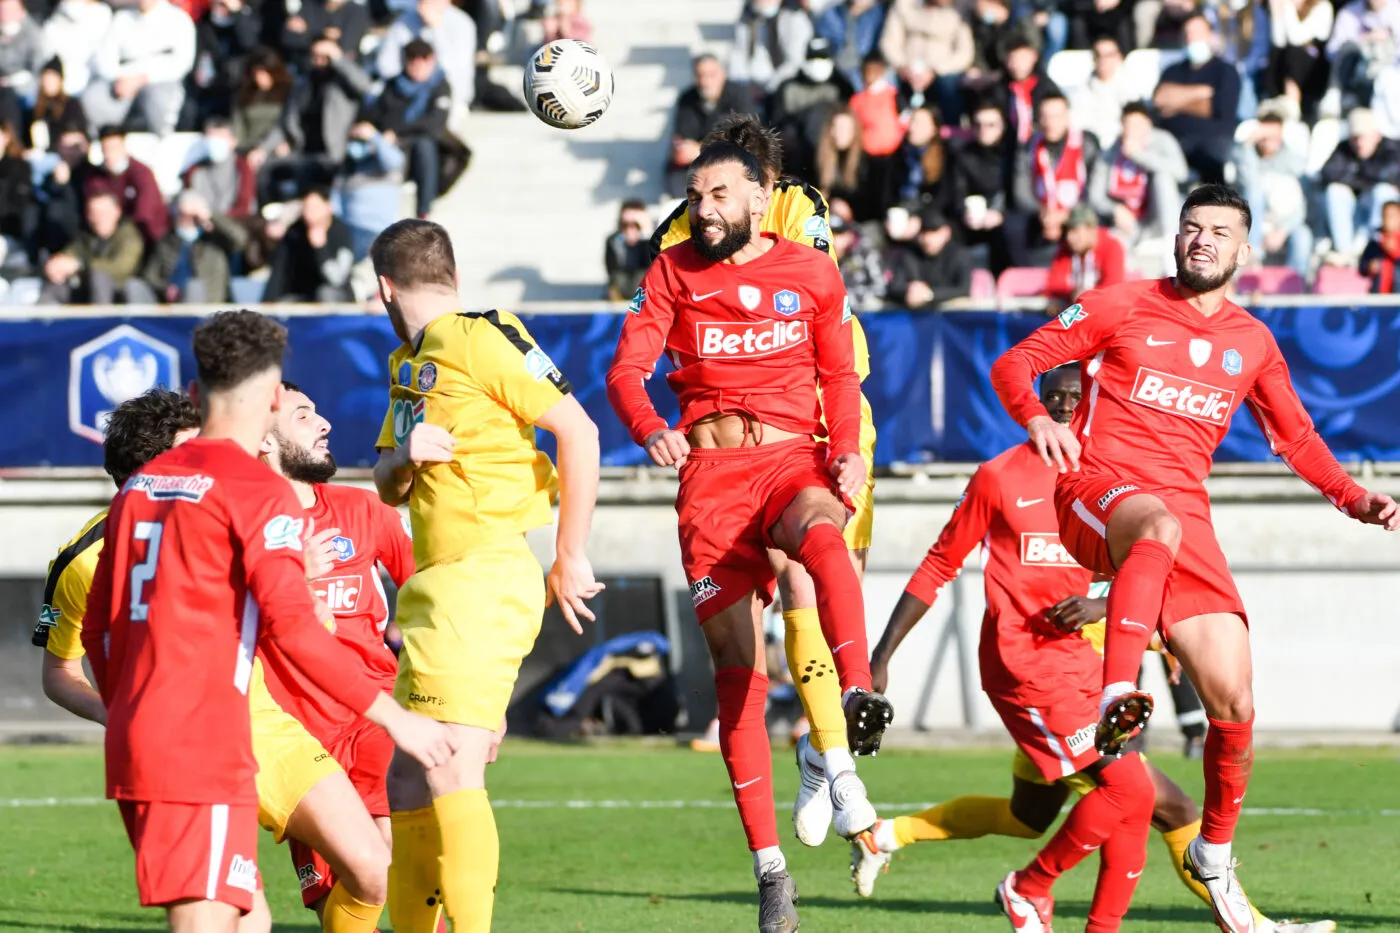 Souleiman DJABOURI of Cannes during the French Cup match between Association Sportive de Cannes v Toulouse Football Club at Stade Pierre de Coubertin on January 2, 2022 in Cannes, France. (Photo by Pascal Della Zuana/Icon Sport)